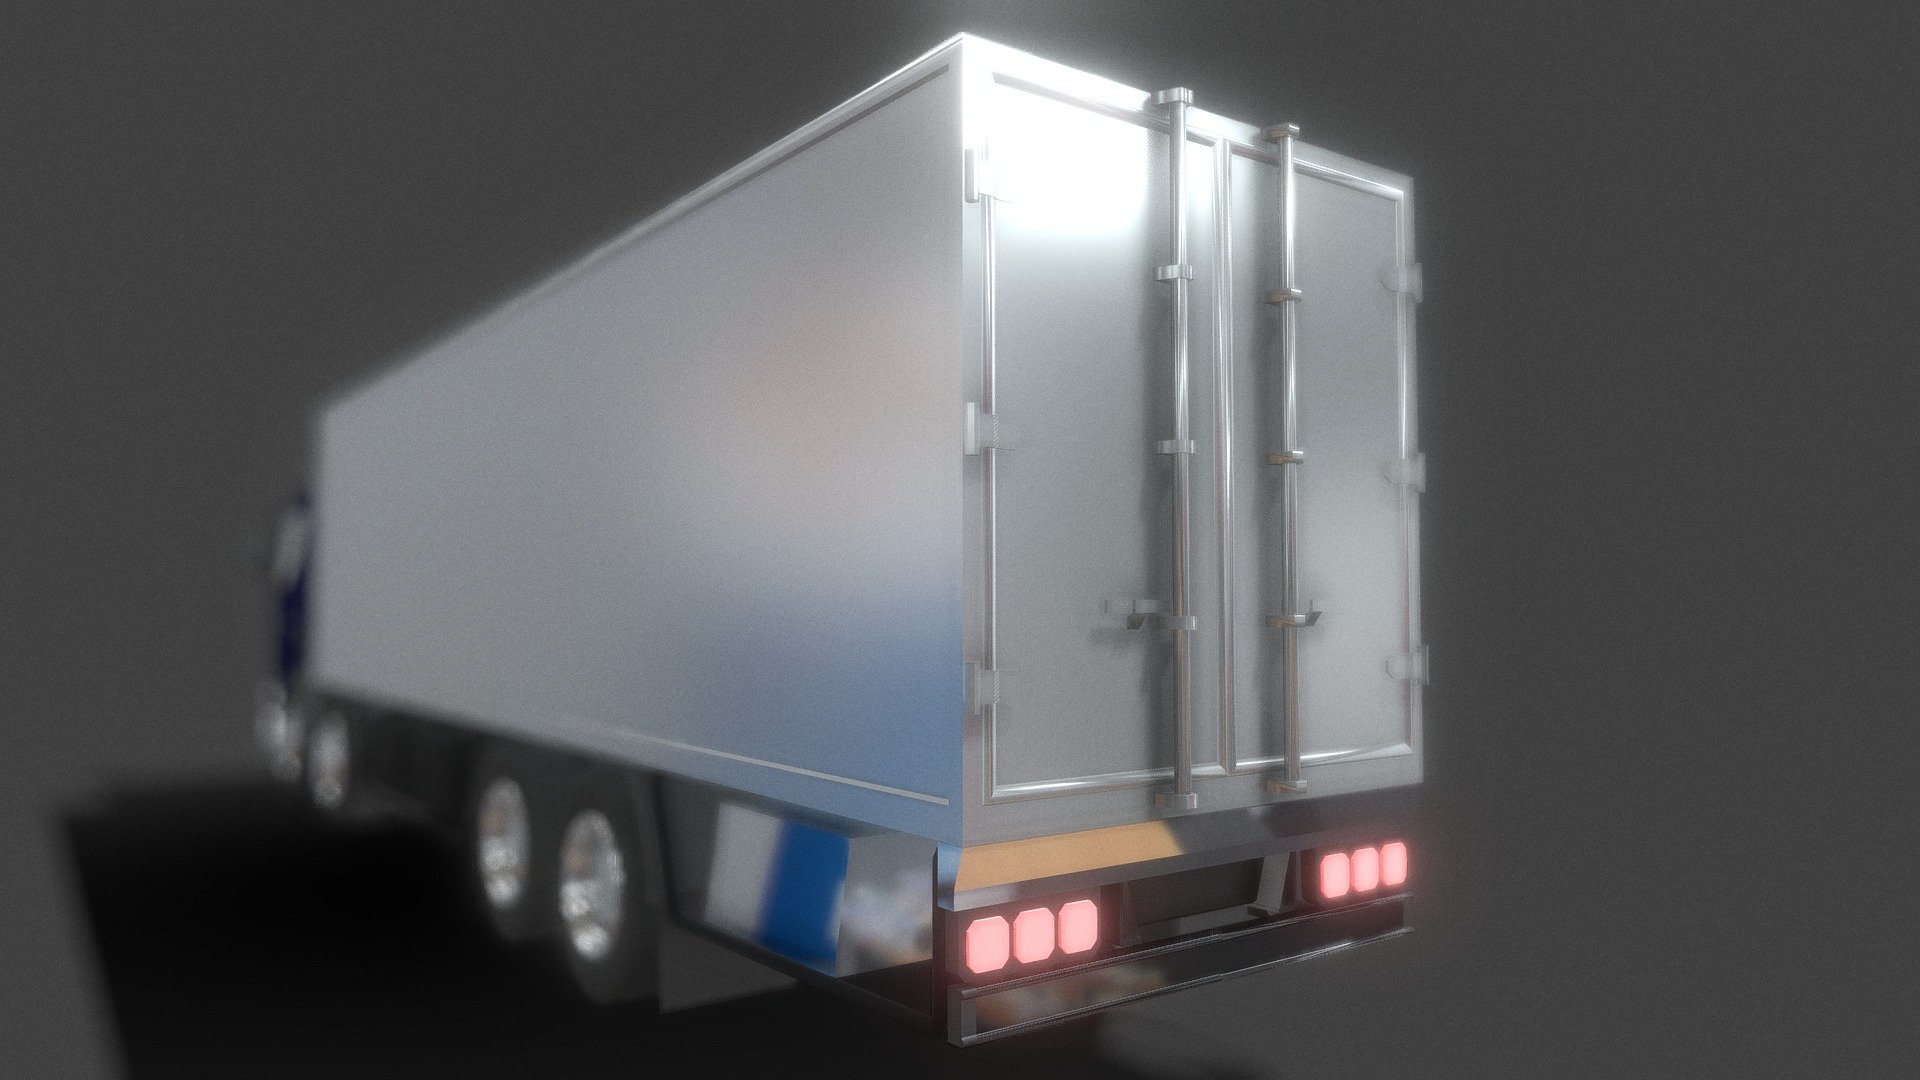 Hurrayyy🥳 it’s me stupids !!!

I bring this model to present you the truck.

Hope you found this model usefull

Enjoy free 3D models!!!!!!!!!!!

ROY - Truck - Download Free 3D model by ROY (@roy.3dartist) 3d model